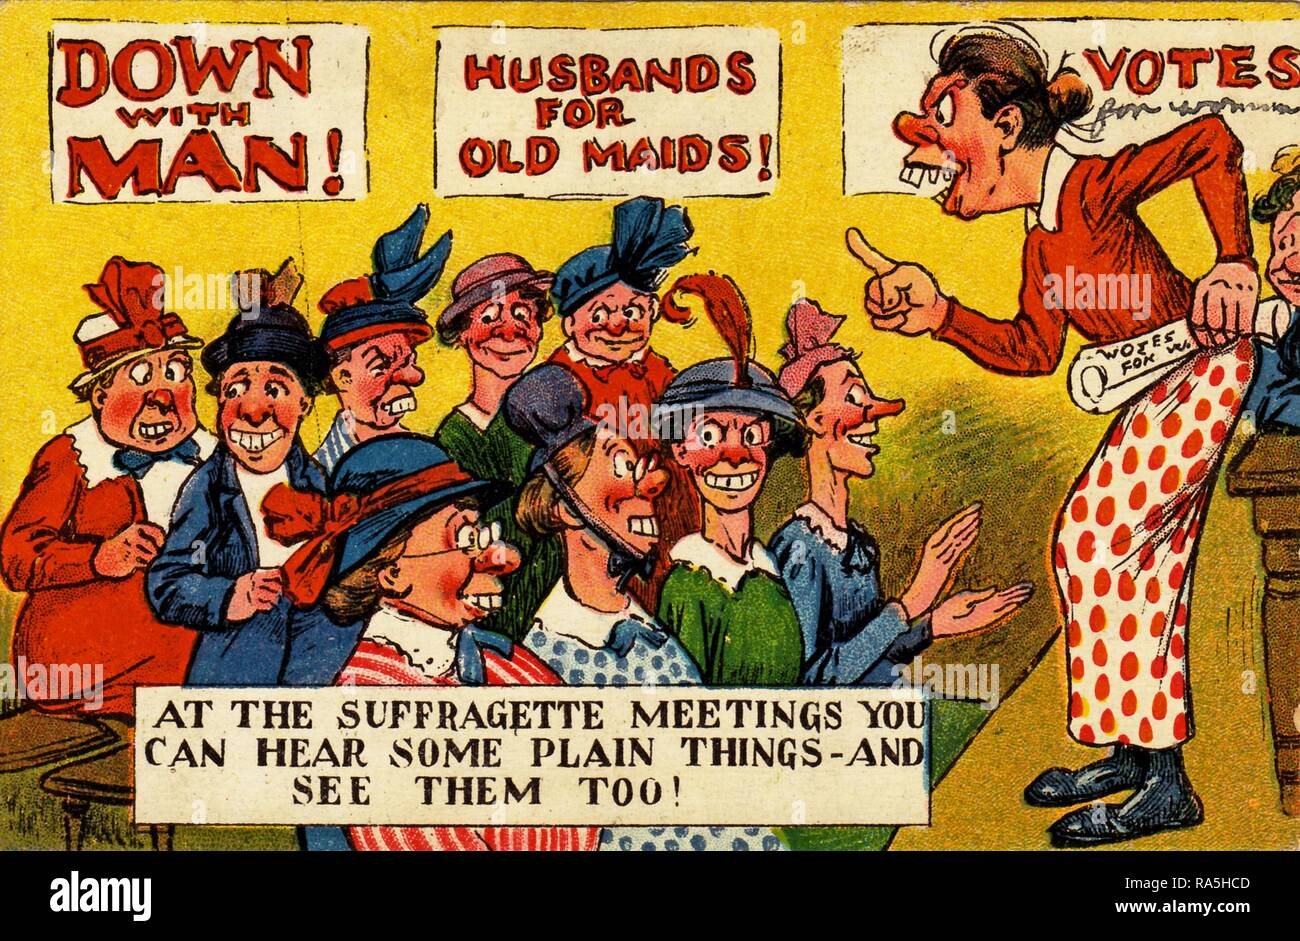 Anti-suffrage, color postcard, with a satirical illustration depicting a mature woman, with buck teeth, speaking to a group of unattractive, middle-aged women, with posters on a wall in the background reading 'Down with Man!' and 'Husbands for Old Maids!' and the derogatory caption 'At the suffragette meetings you can hear some plain things - and see them too!' published for the British market, 1900. () Stock Photo